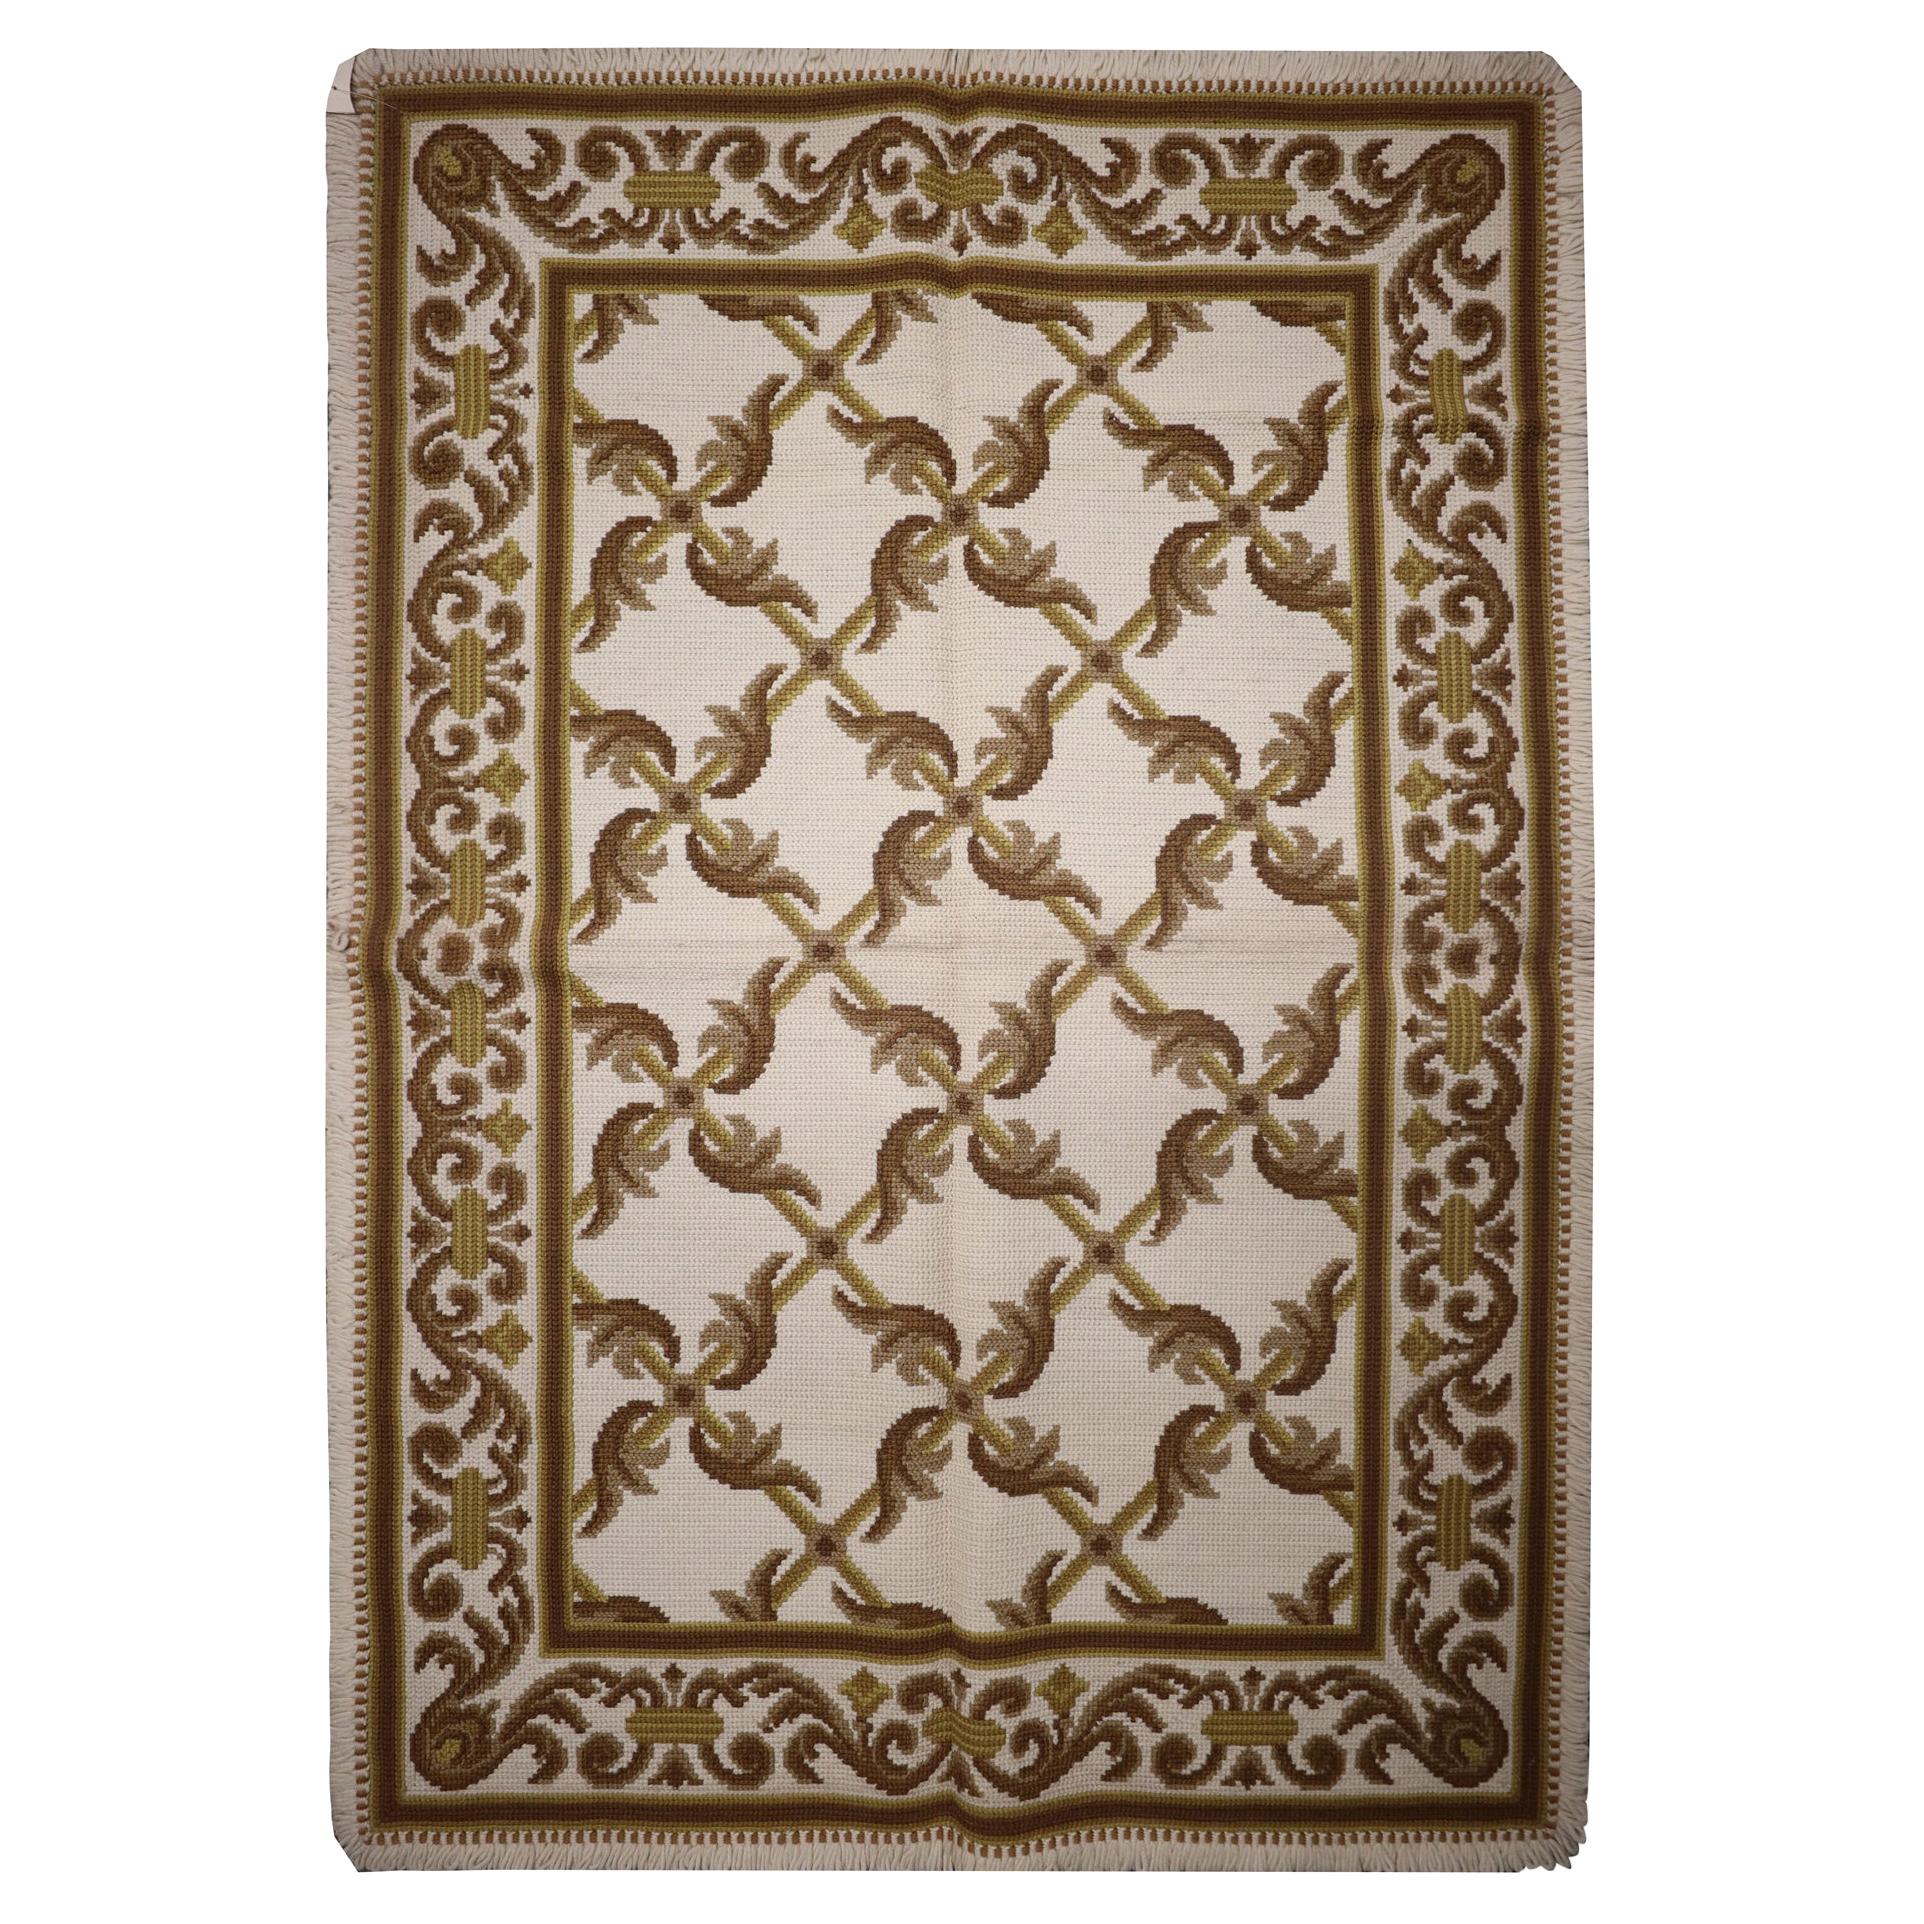 Traditional Needlepoint Rug, Handwoven Wool Beige Carpet Area Rug For Sale